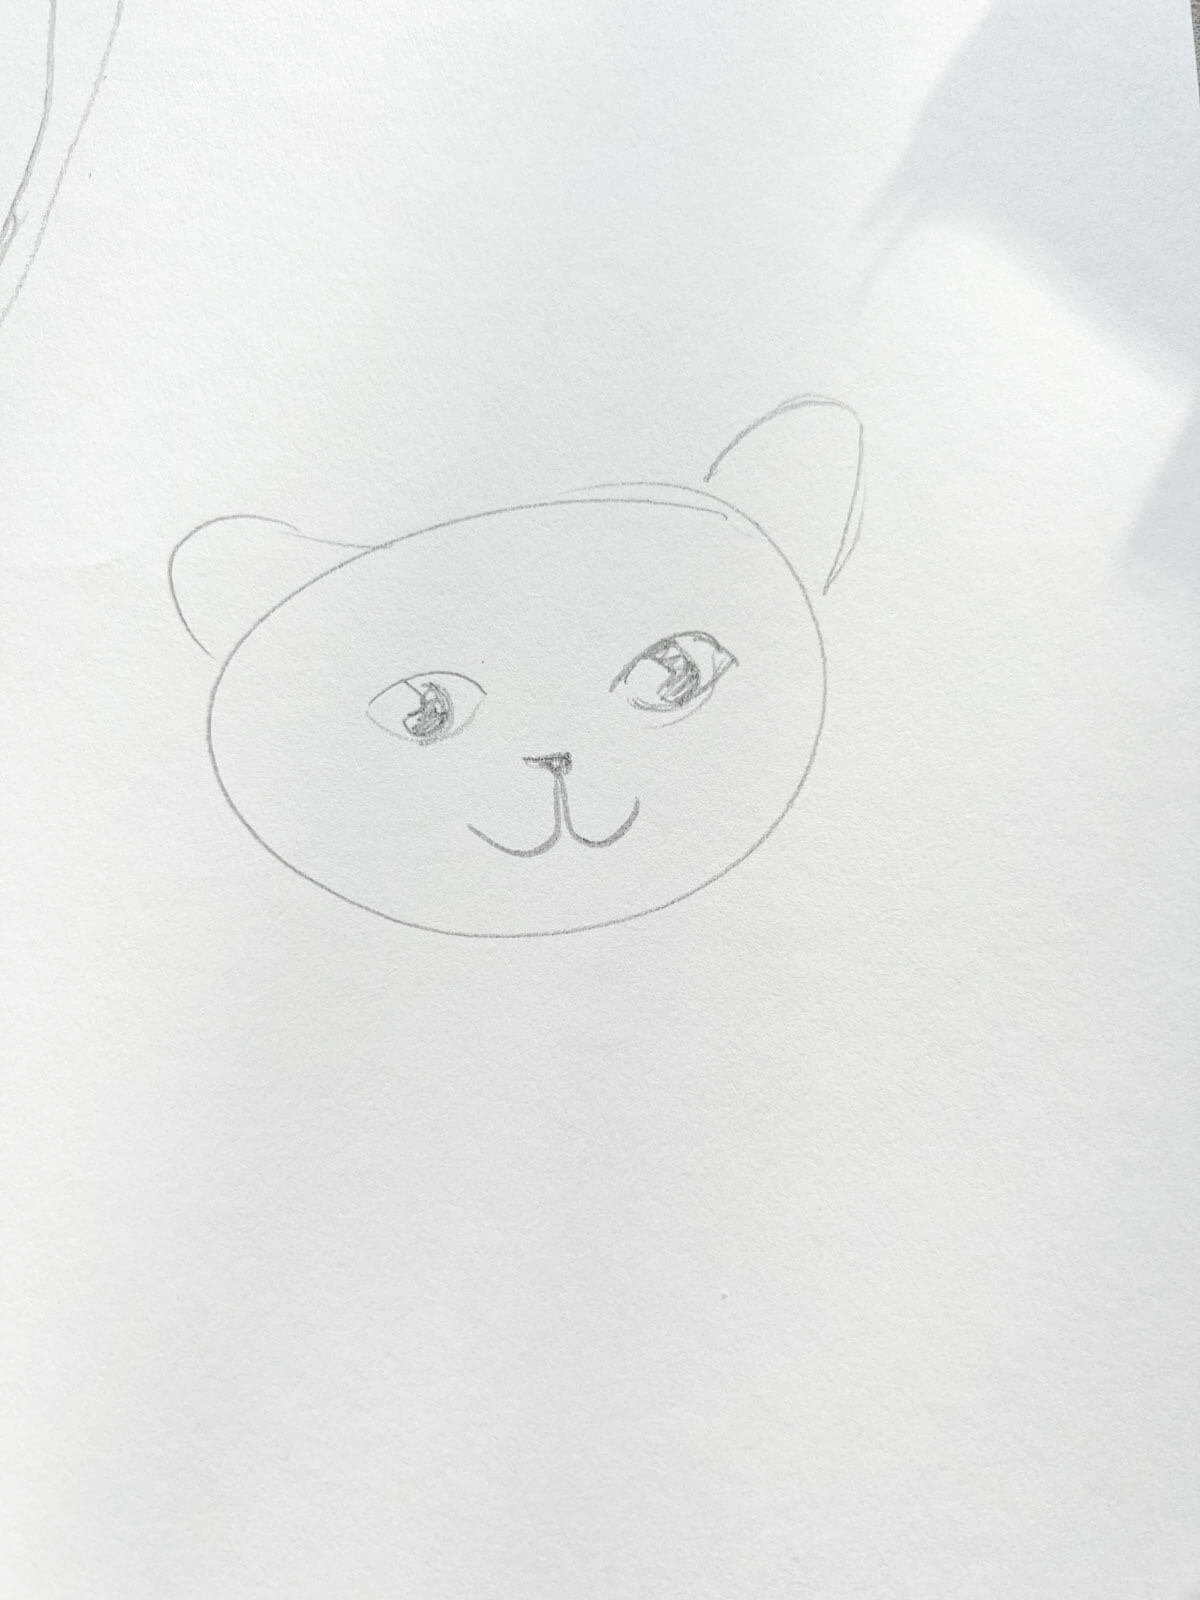 simple cat face drawing on white paper.